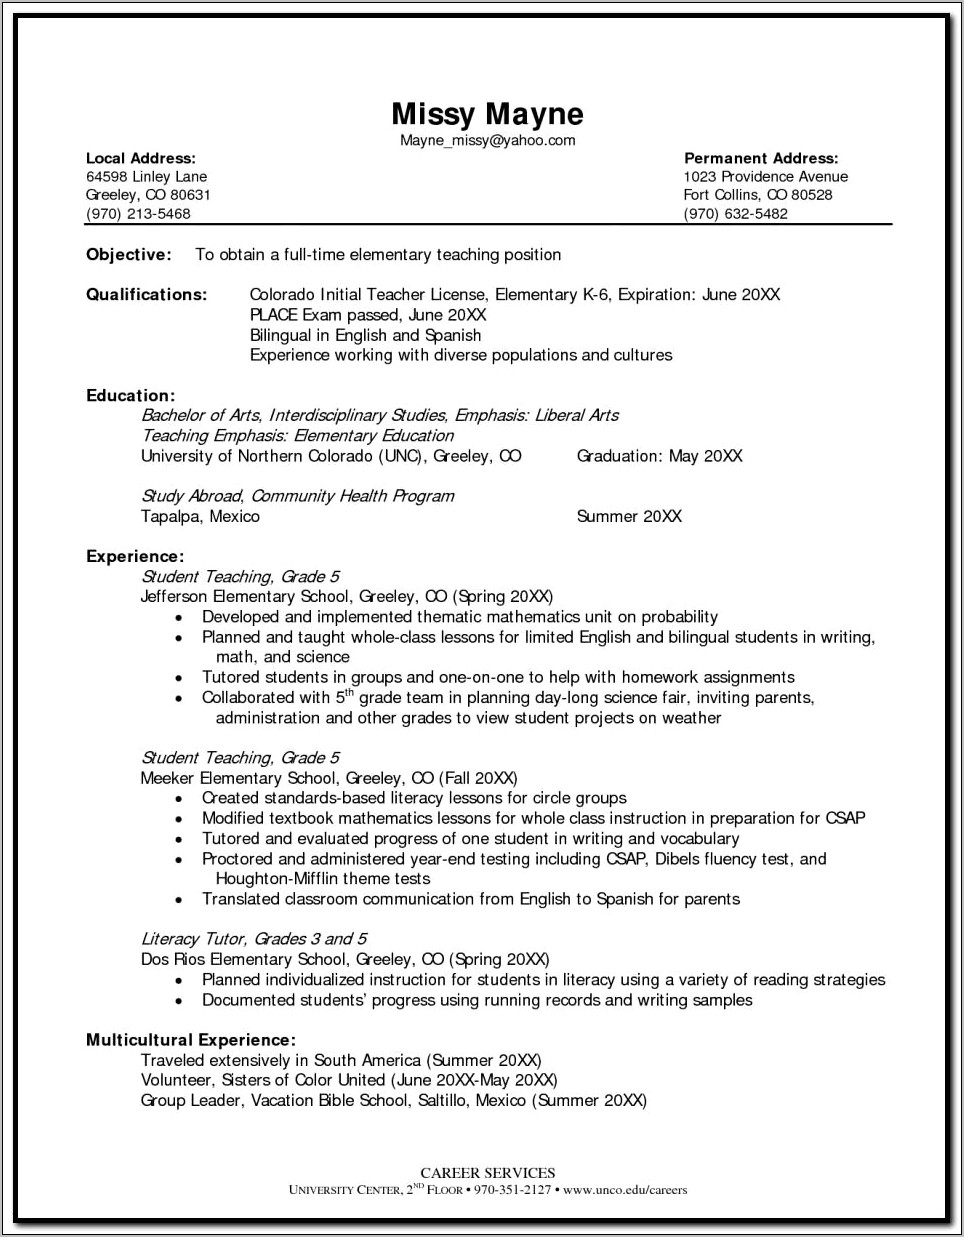 Resume Experience Examples For Grade 5